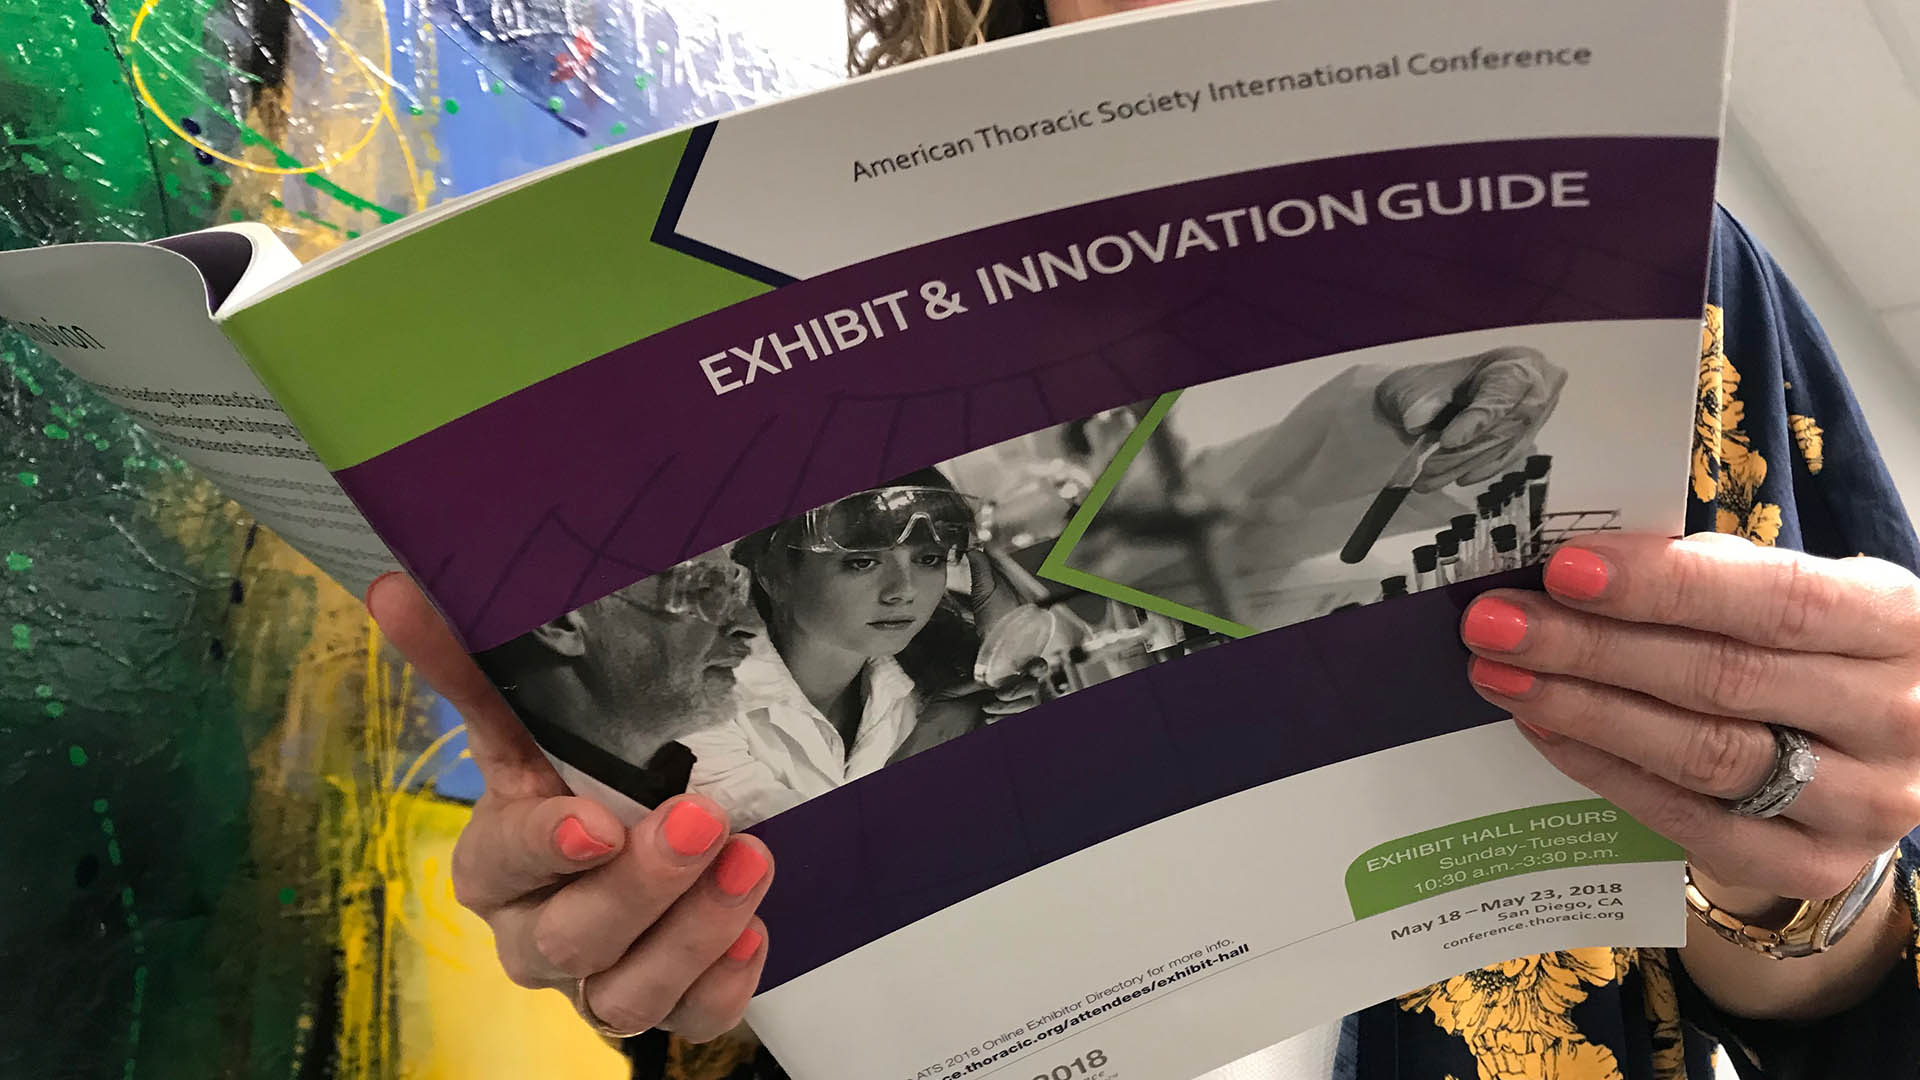 American Thoracic Society 2018 - Exhibit & Innovation Guide